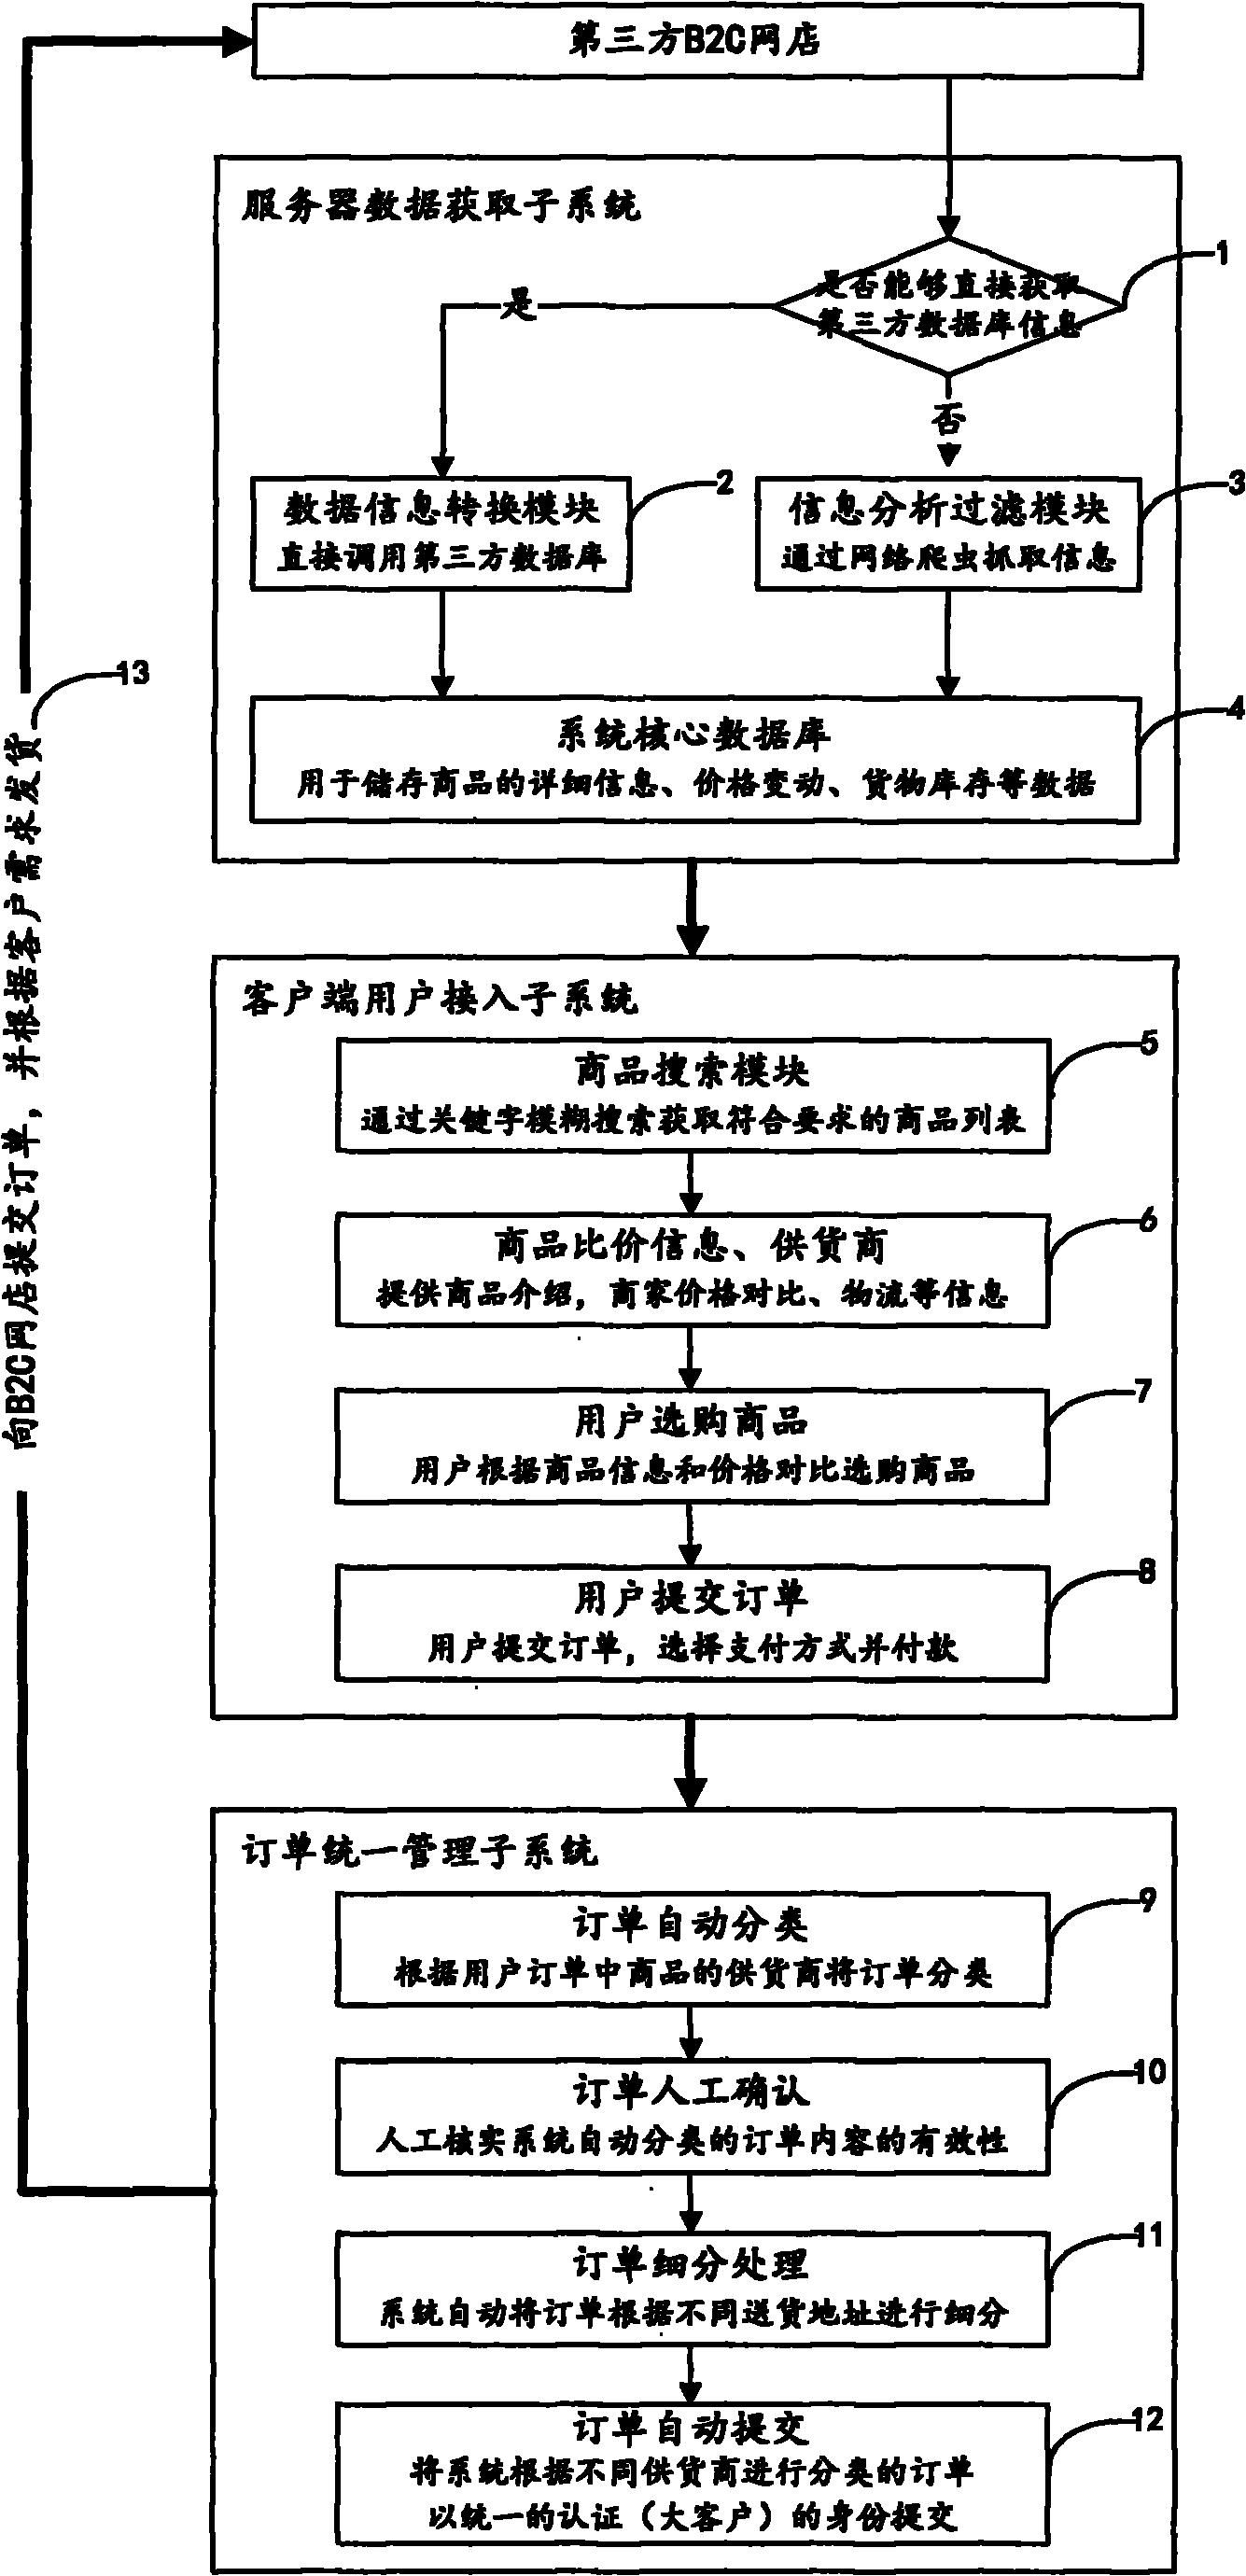 Price comparing network shopping system and method